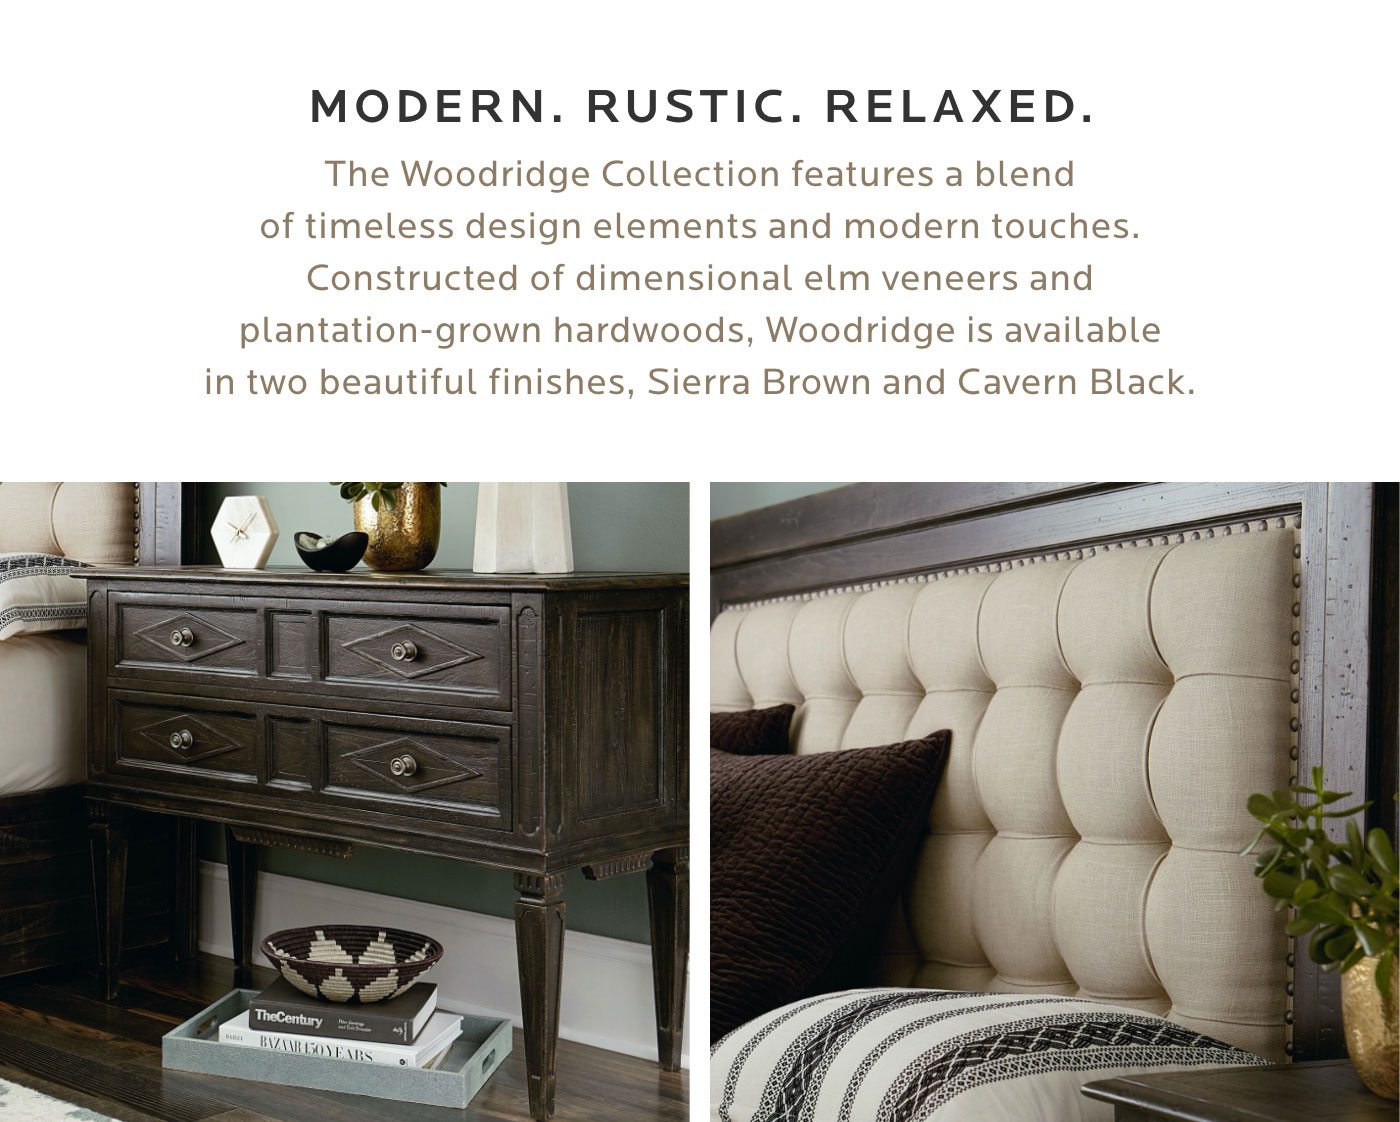 The Woodridge Collection features a blend of timeless design elements and modern touches.